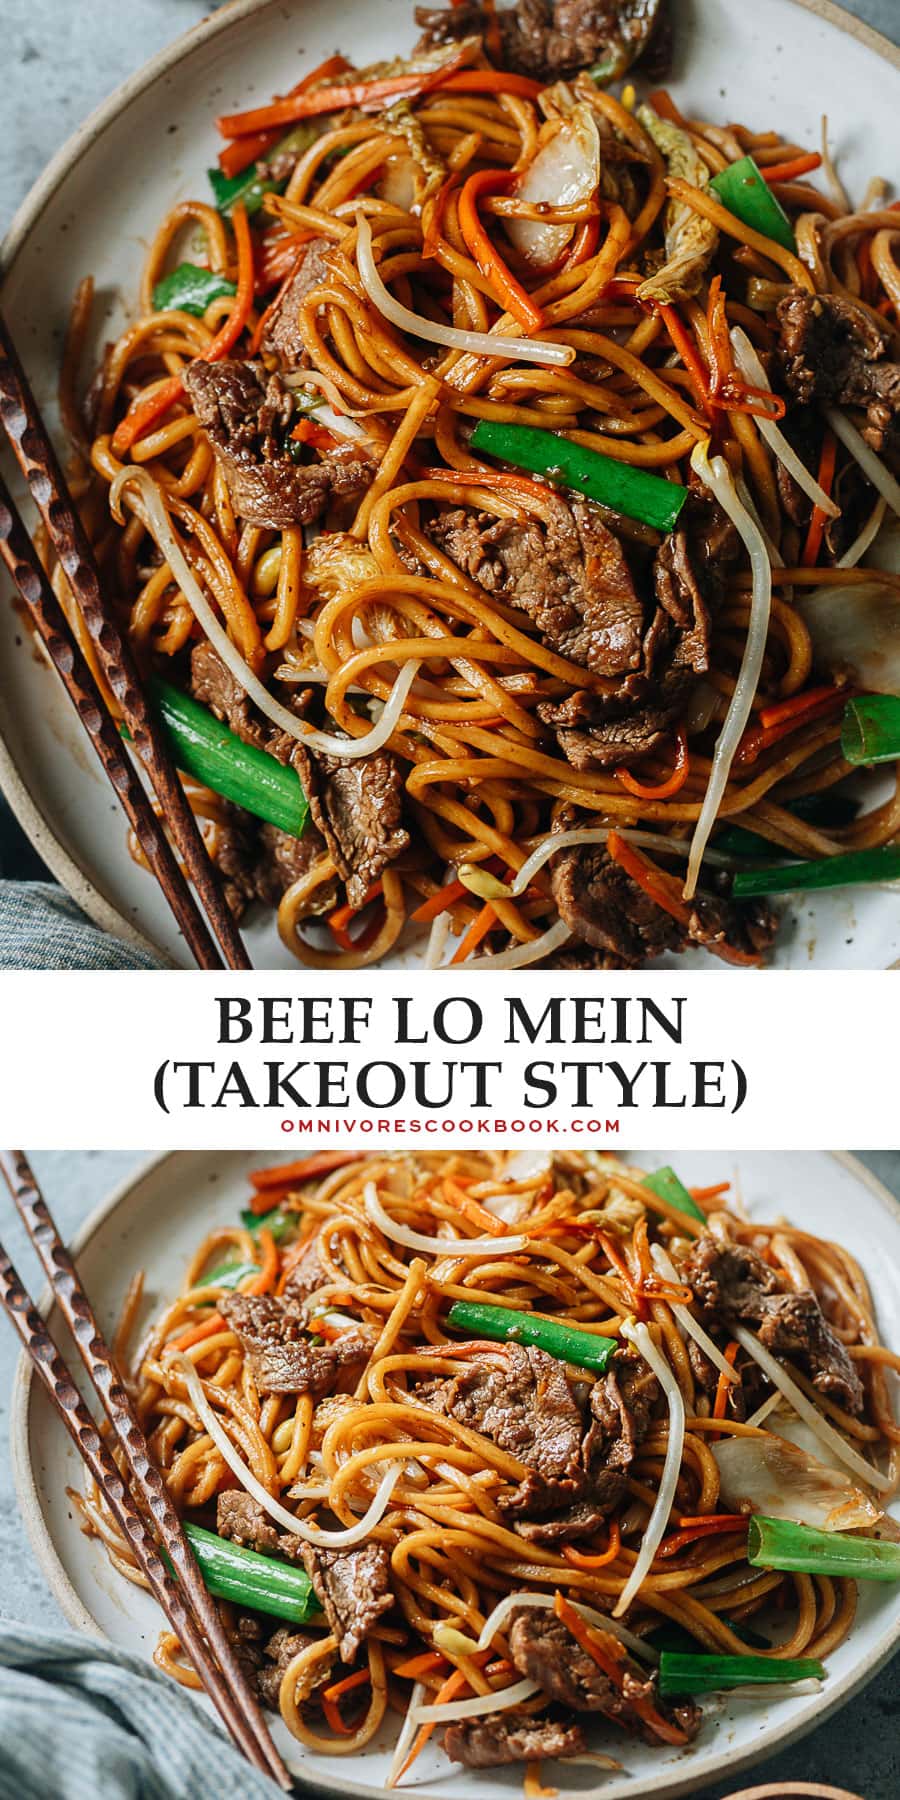 Tender slices of beef mingling with thick lo mein noodles, vegetables, and a savory sauce are perfect for tonight's dinner in this beef lo mein. And it takes less time than takeout to put on your table!